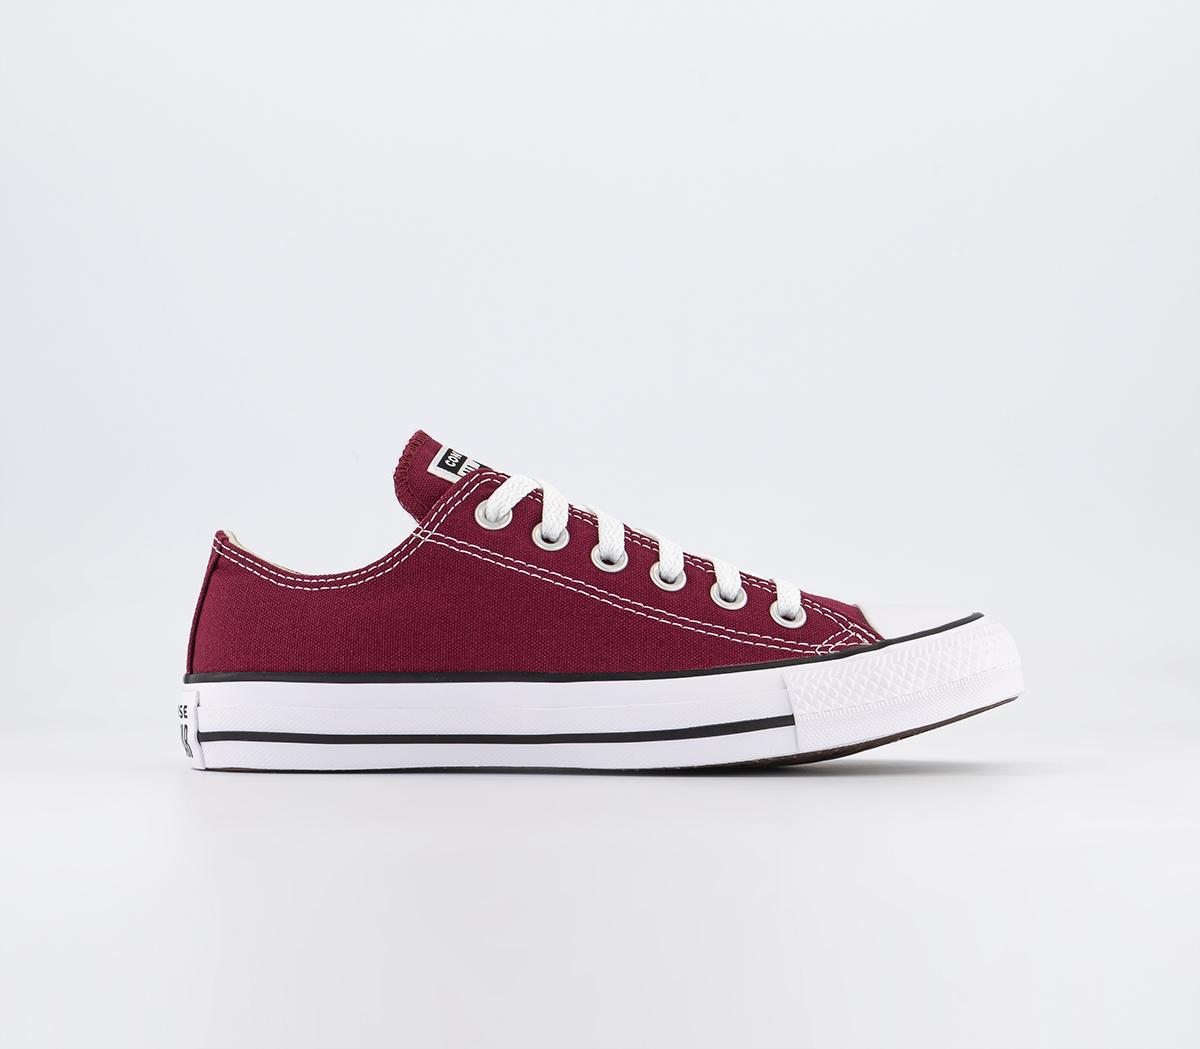 Converse All Star Low Maroon Canvas 